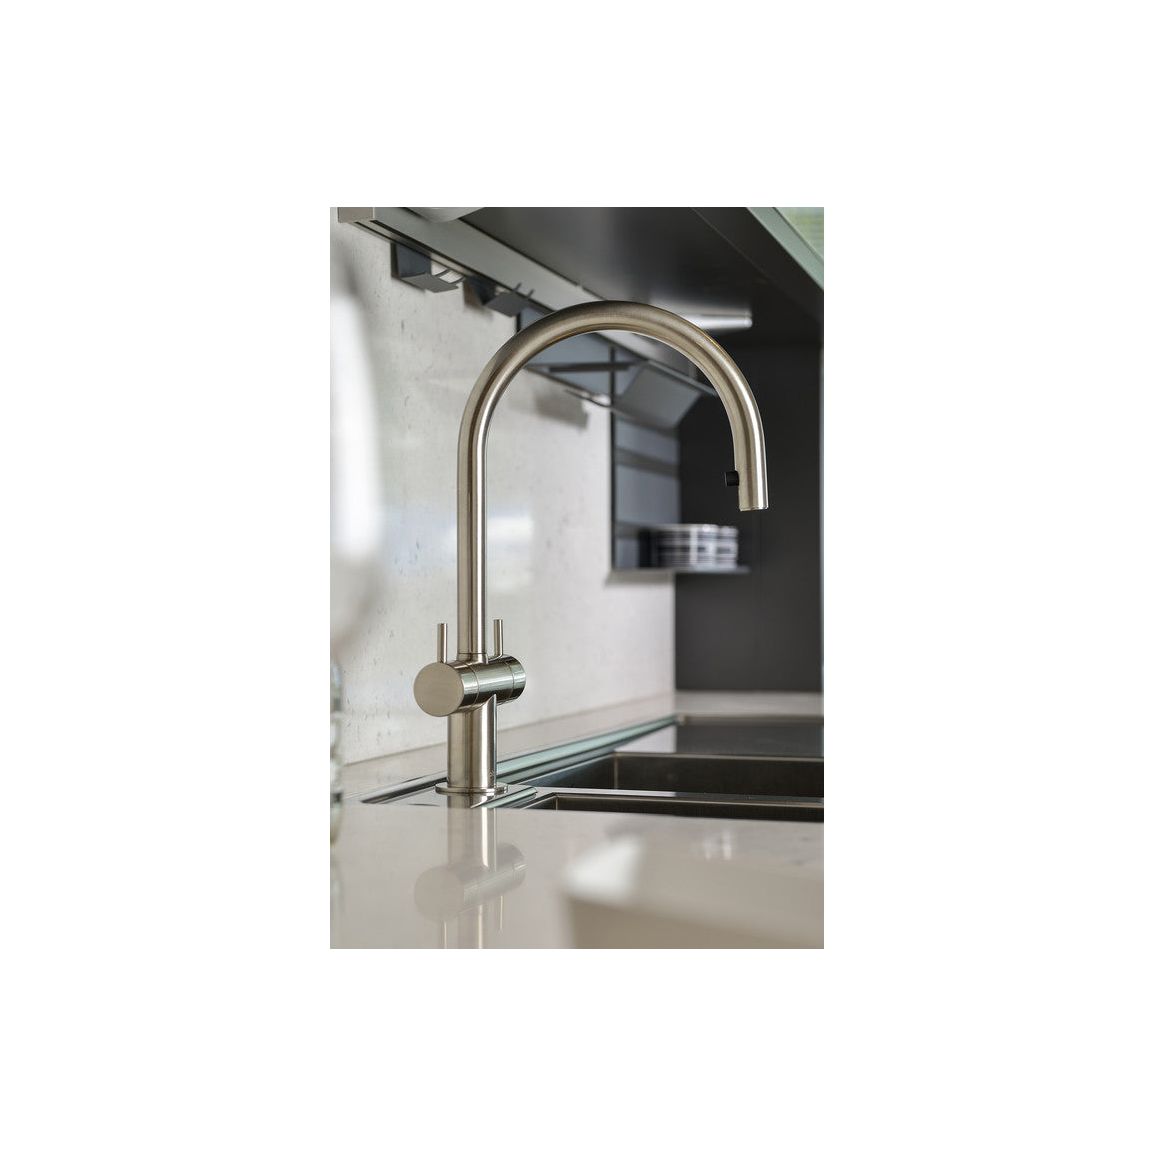 Abode Hesta Mixer Tap w/Pull Out - Brushed Nickel